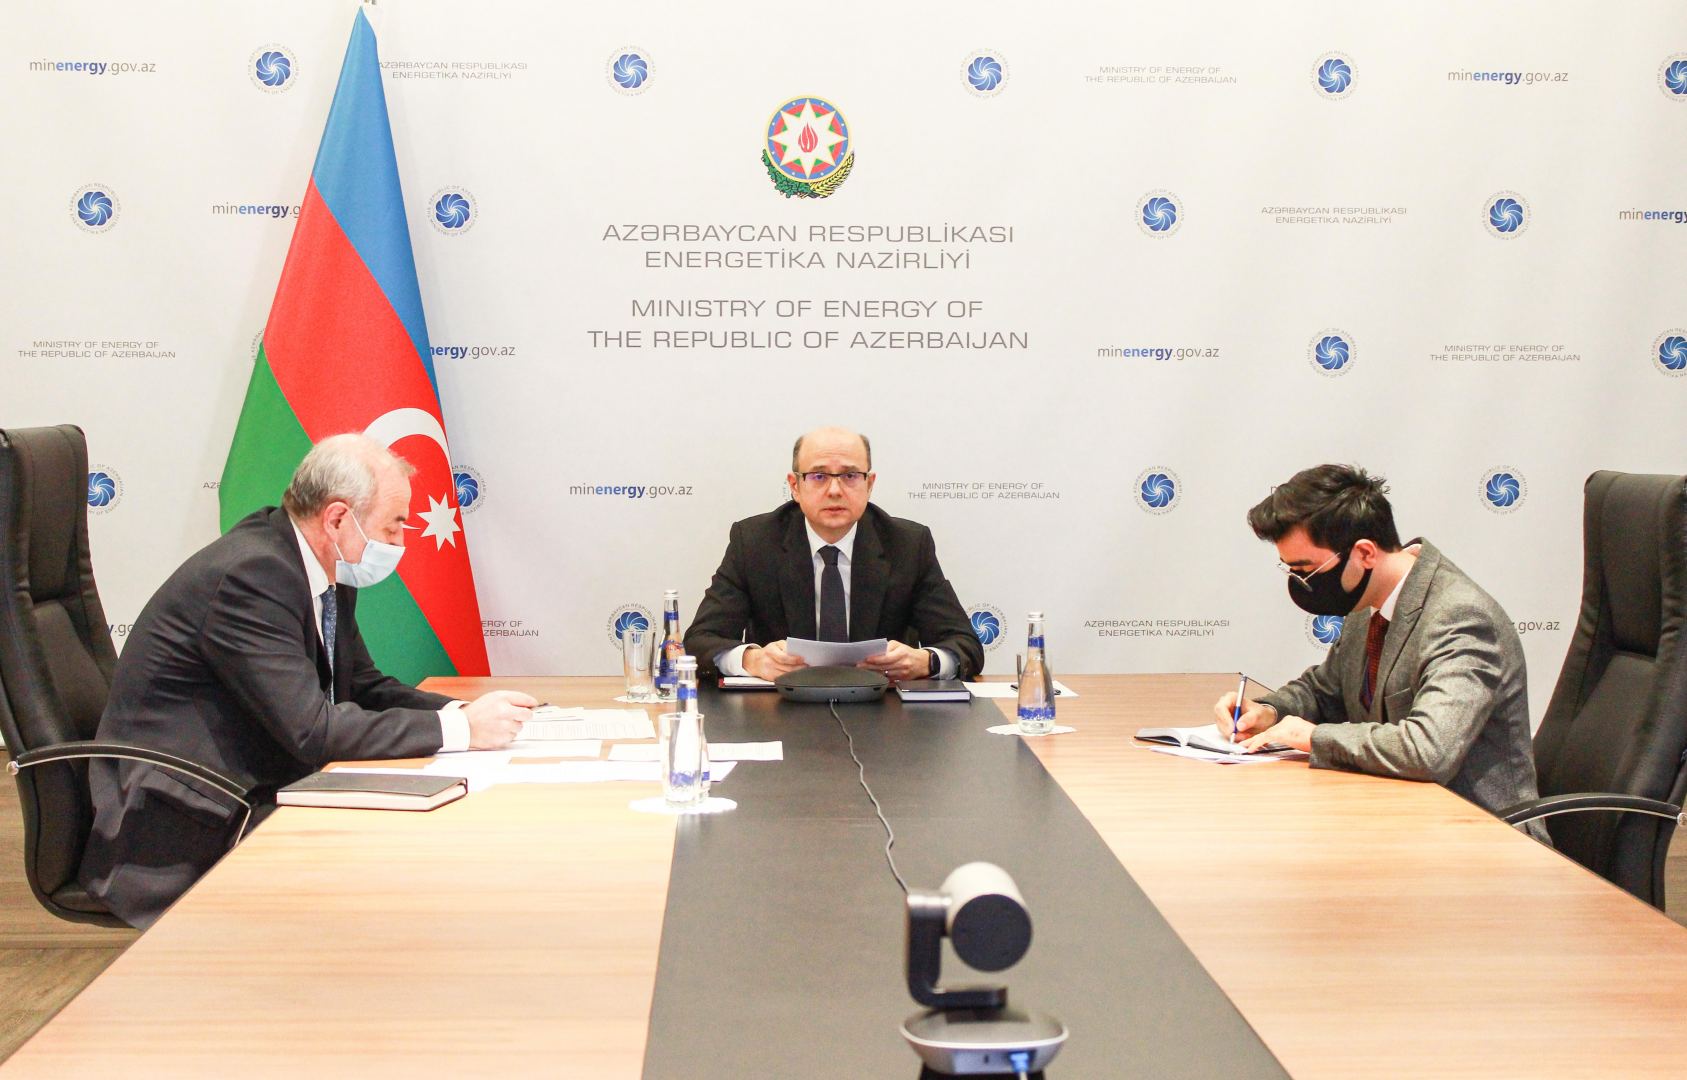 Projects on using renewable energy sources discussed in Azerbaijan (PHOTO)